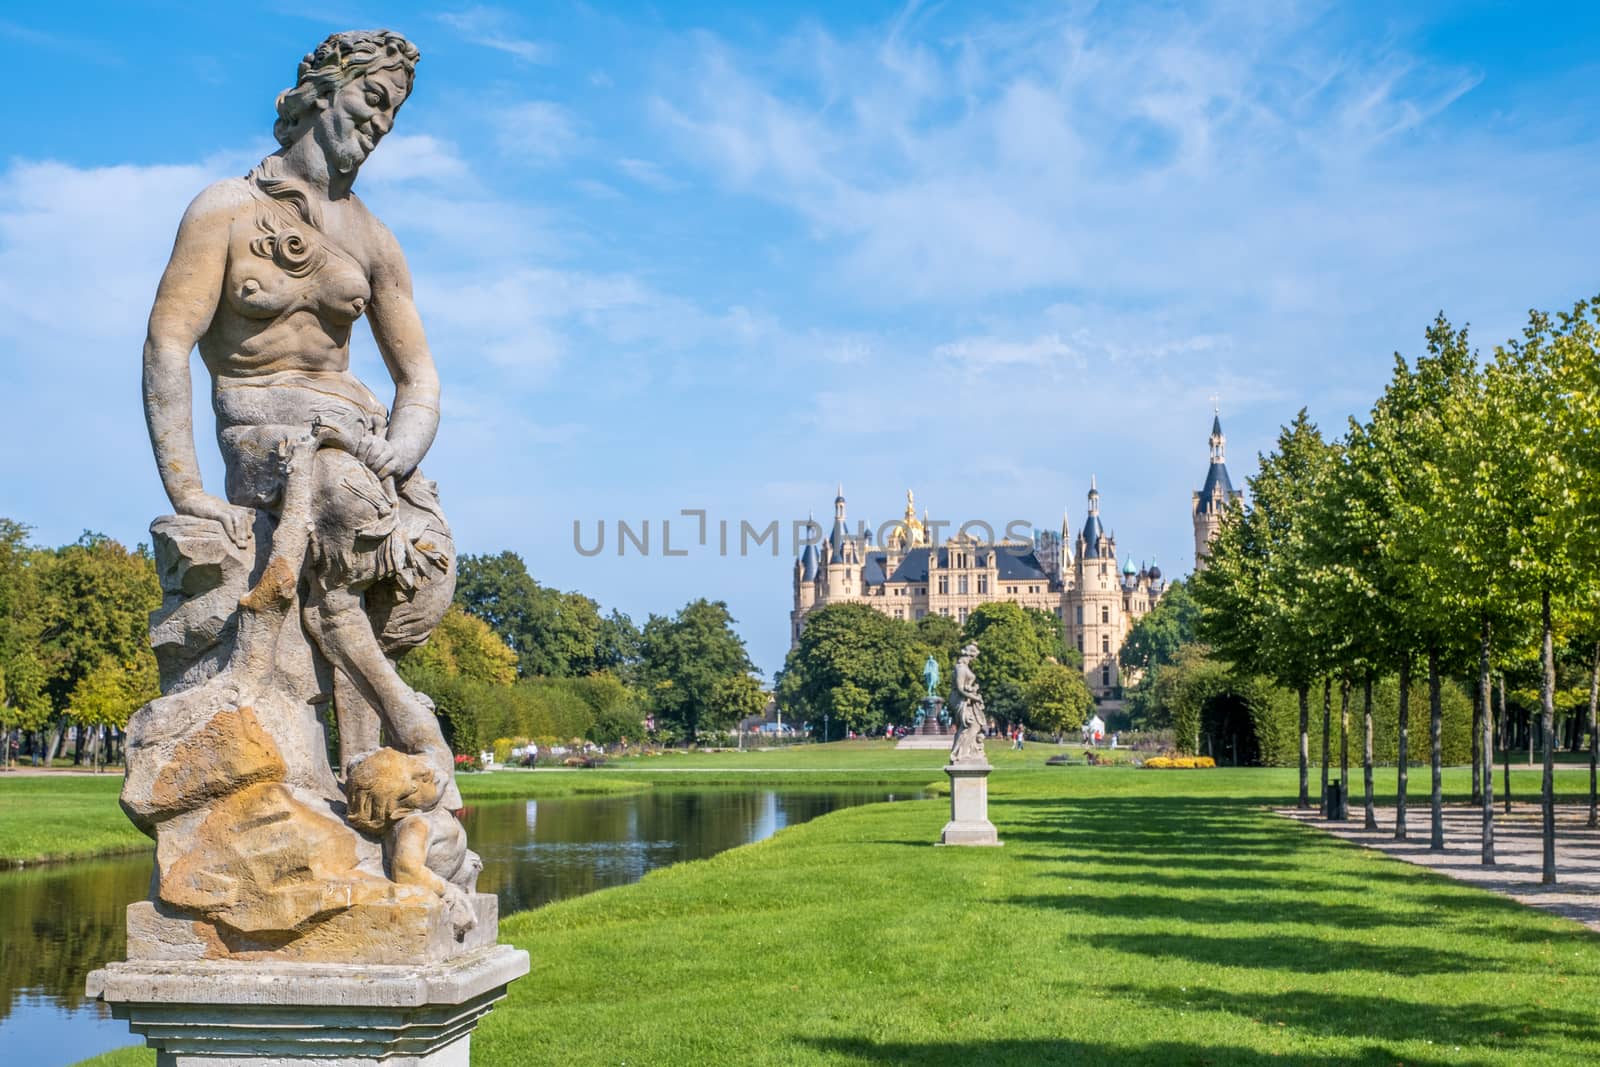 Alley of trees and statues in the Schwerin park.